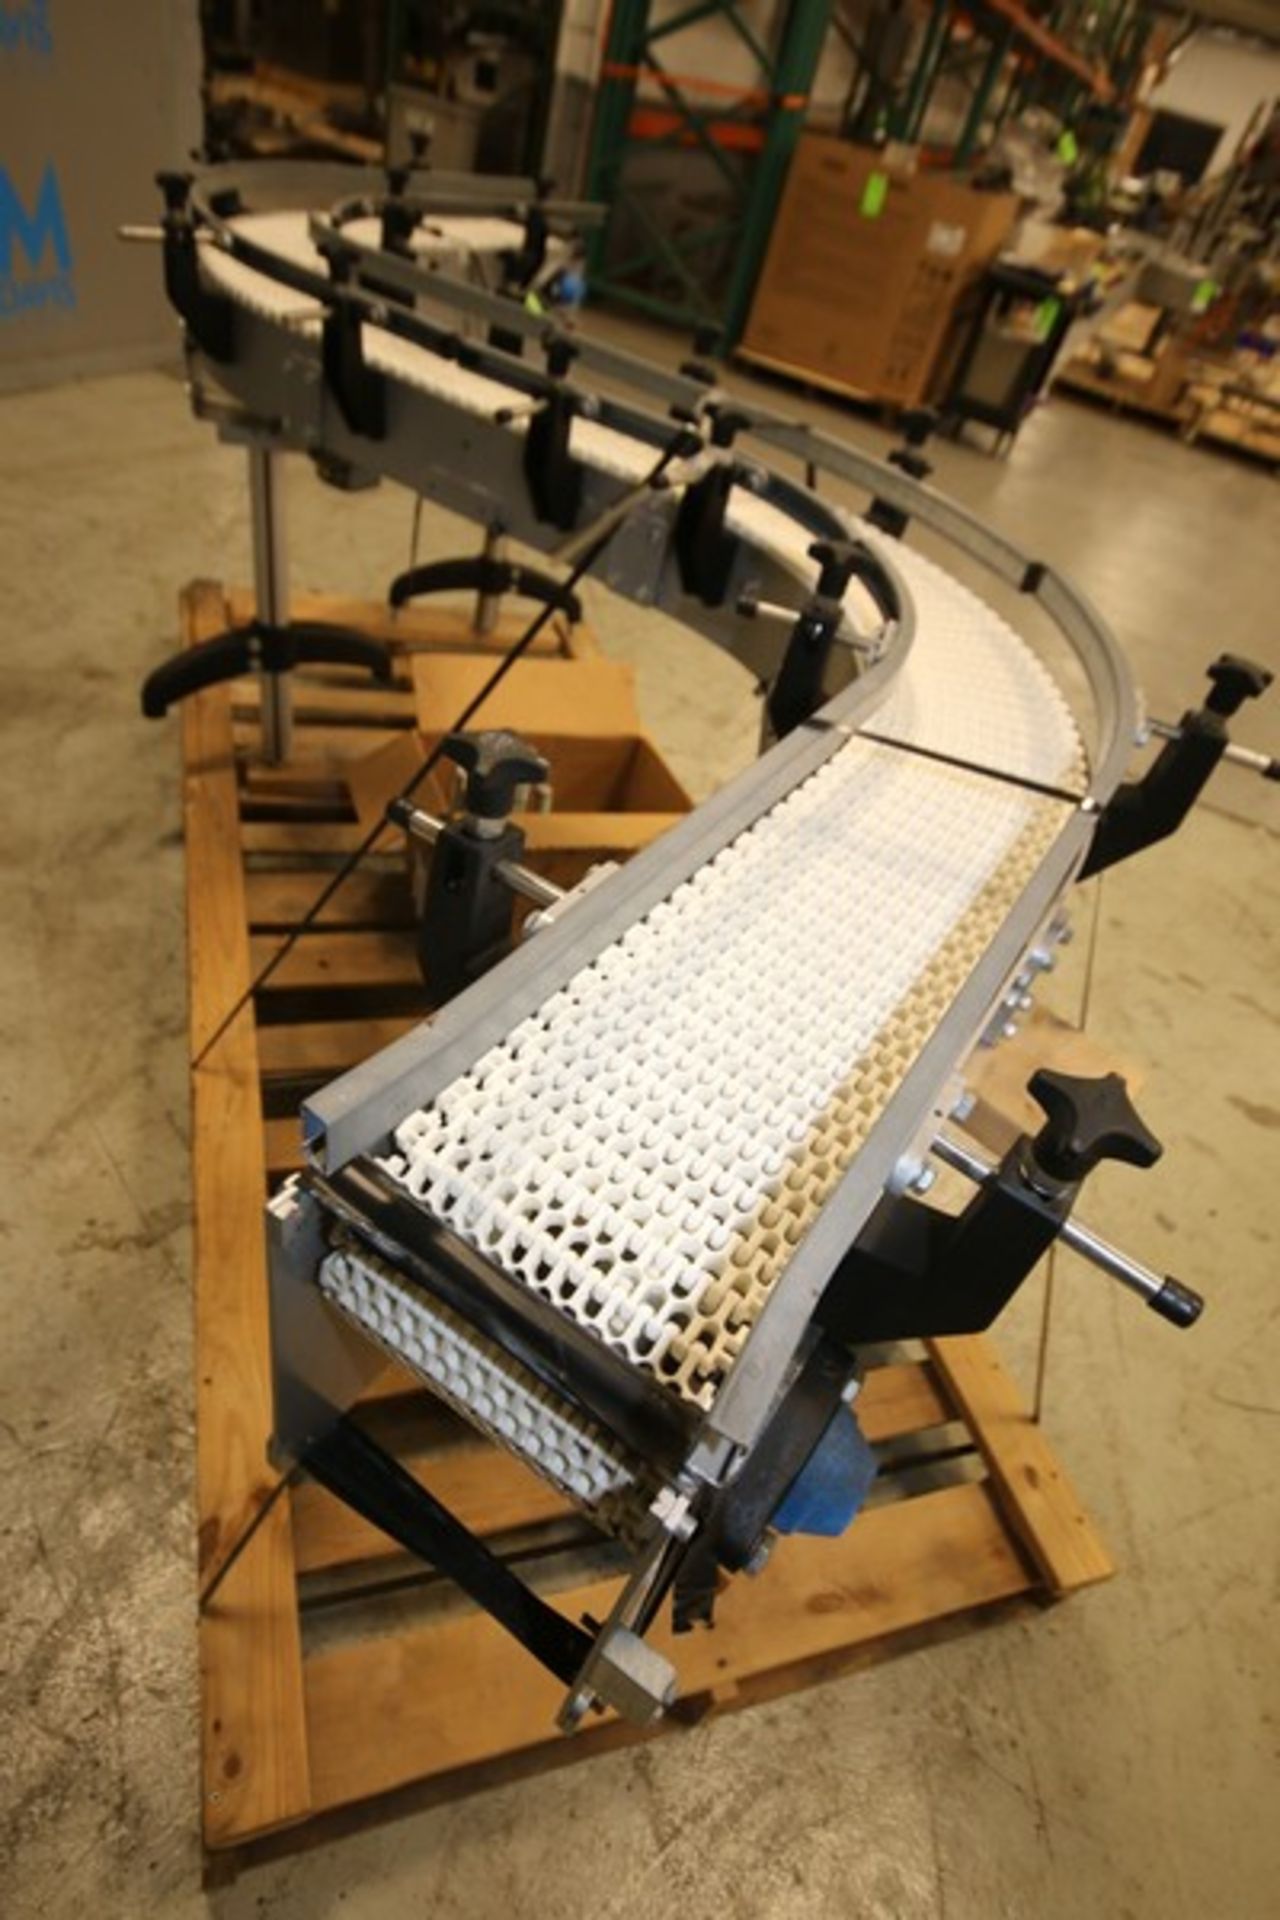 Like New Aprox. 10' L x 7" W x 36" H S Configuration Production Conveyor with Intralox Plastic Belt, - Image 5 of 8